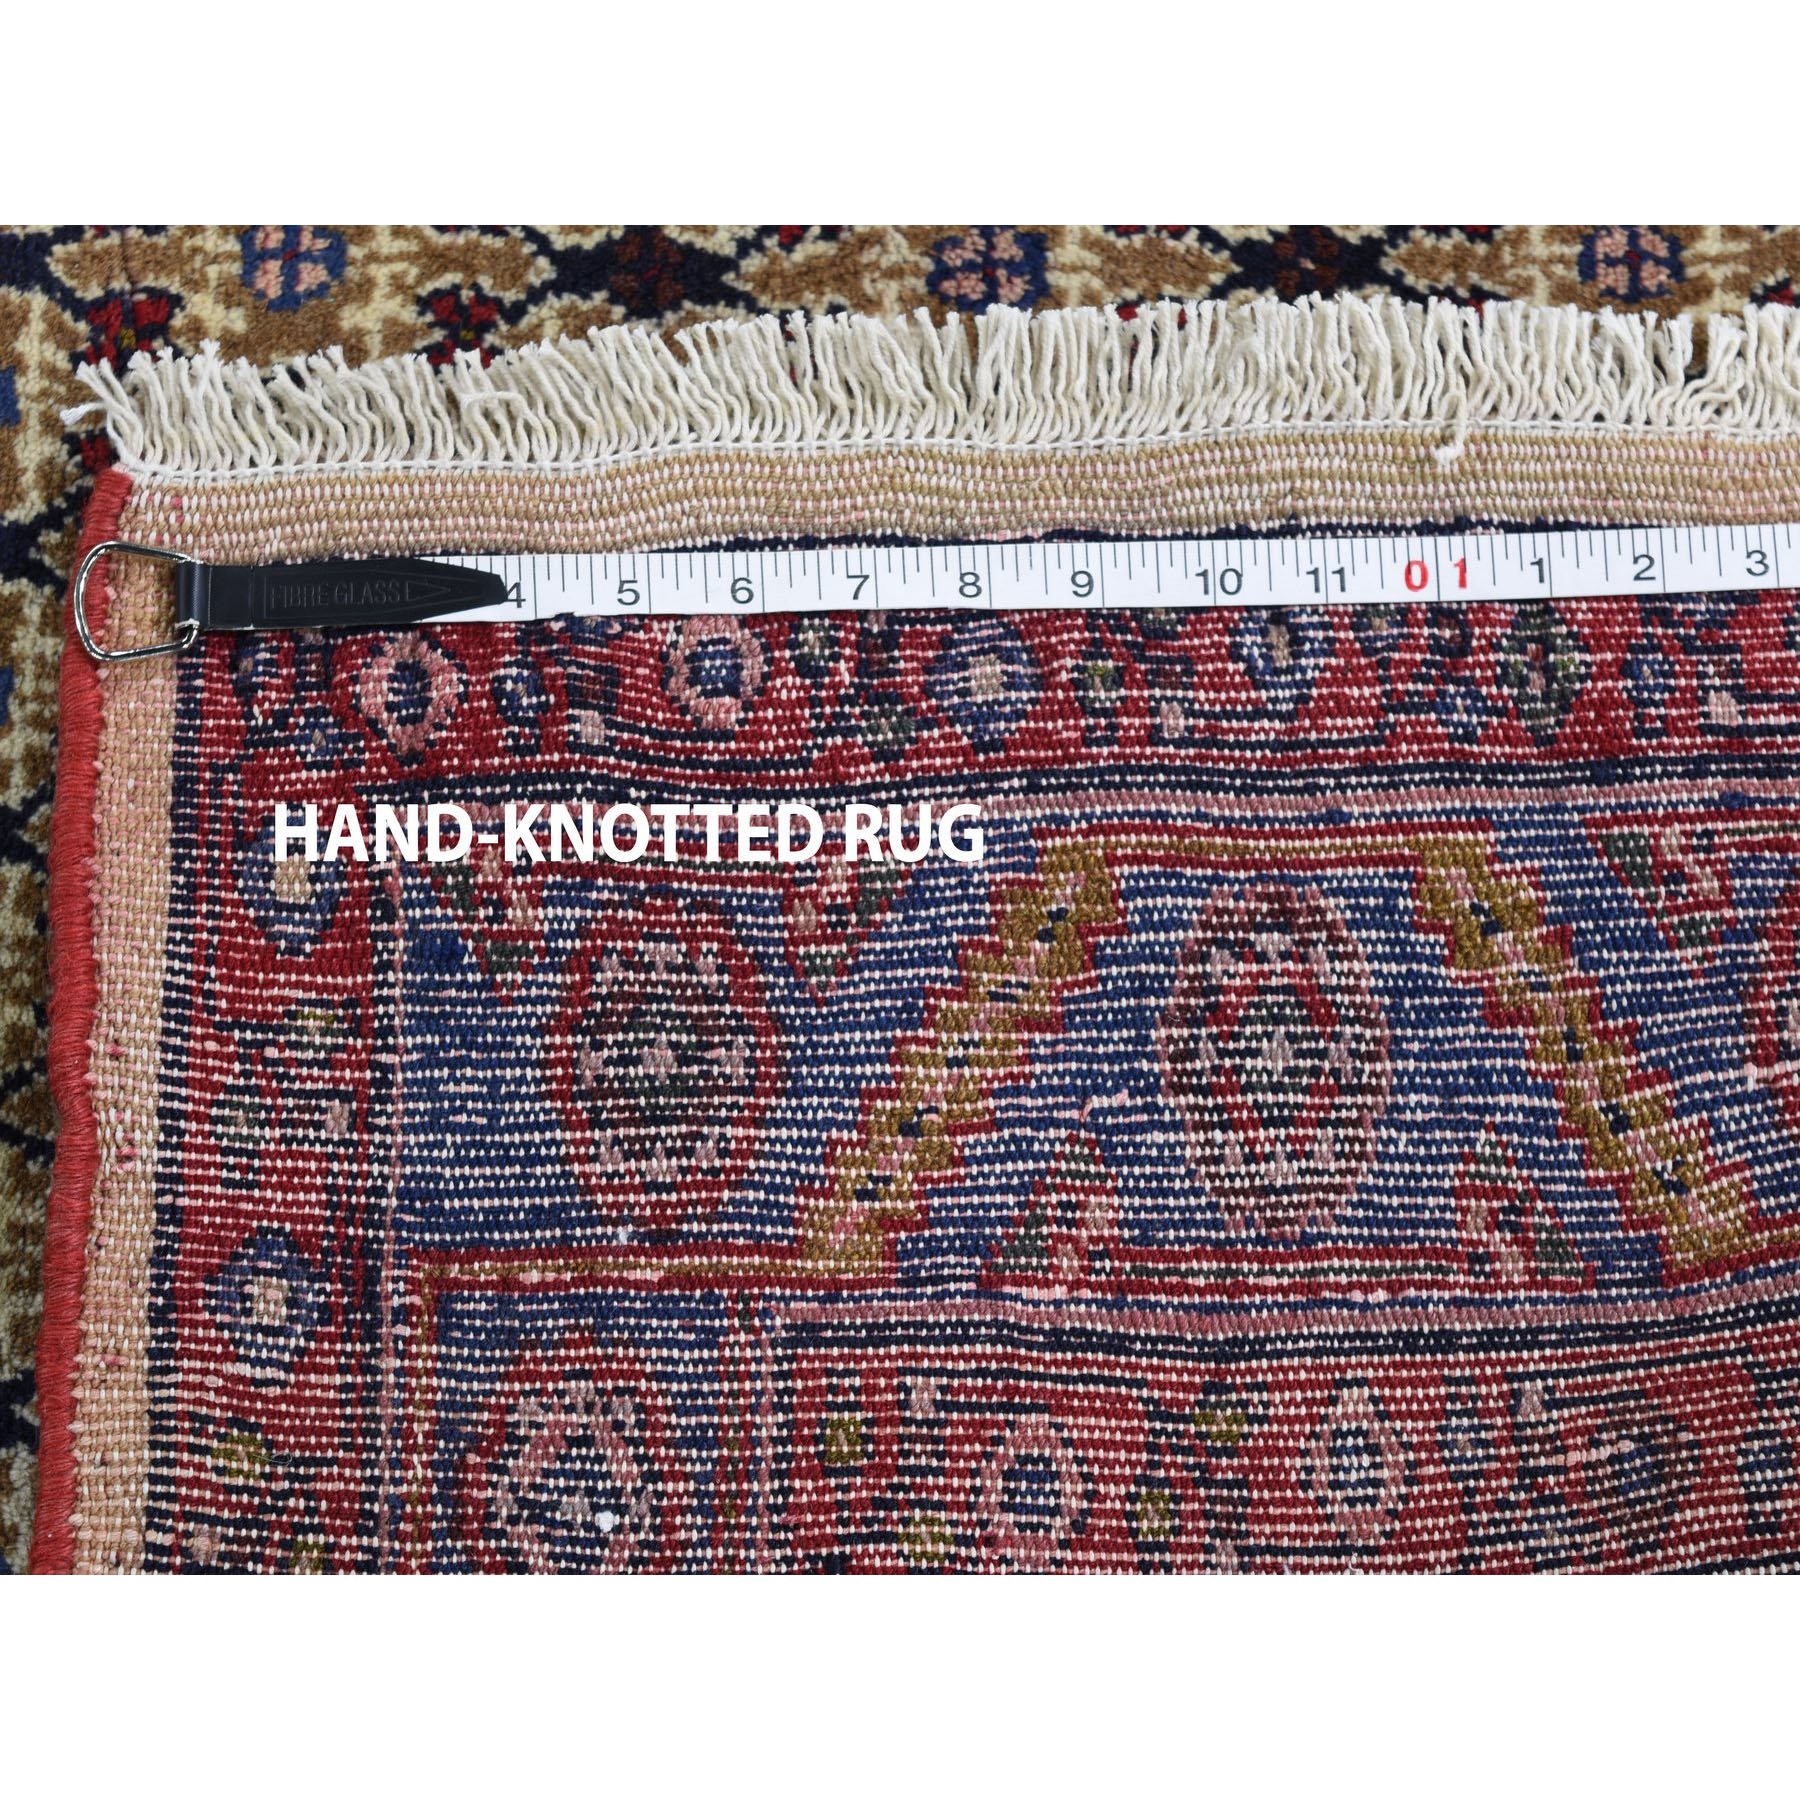 7-3 x10-6  Brown New Persian Hamadan Pure Wool Camel Hair Hand Knotted Oriental Rug 